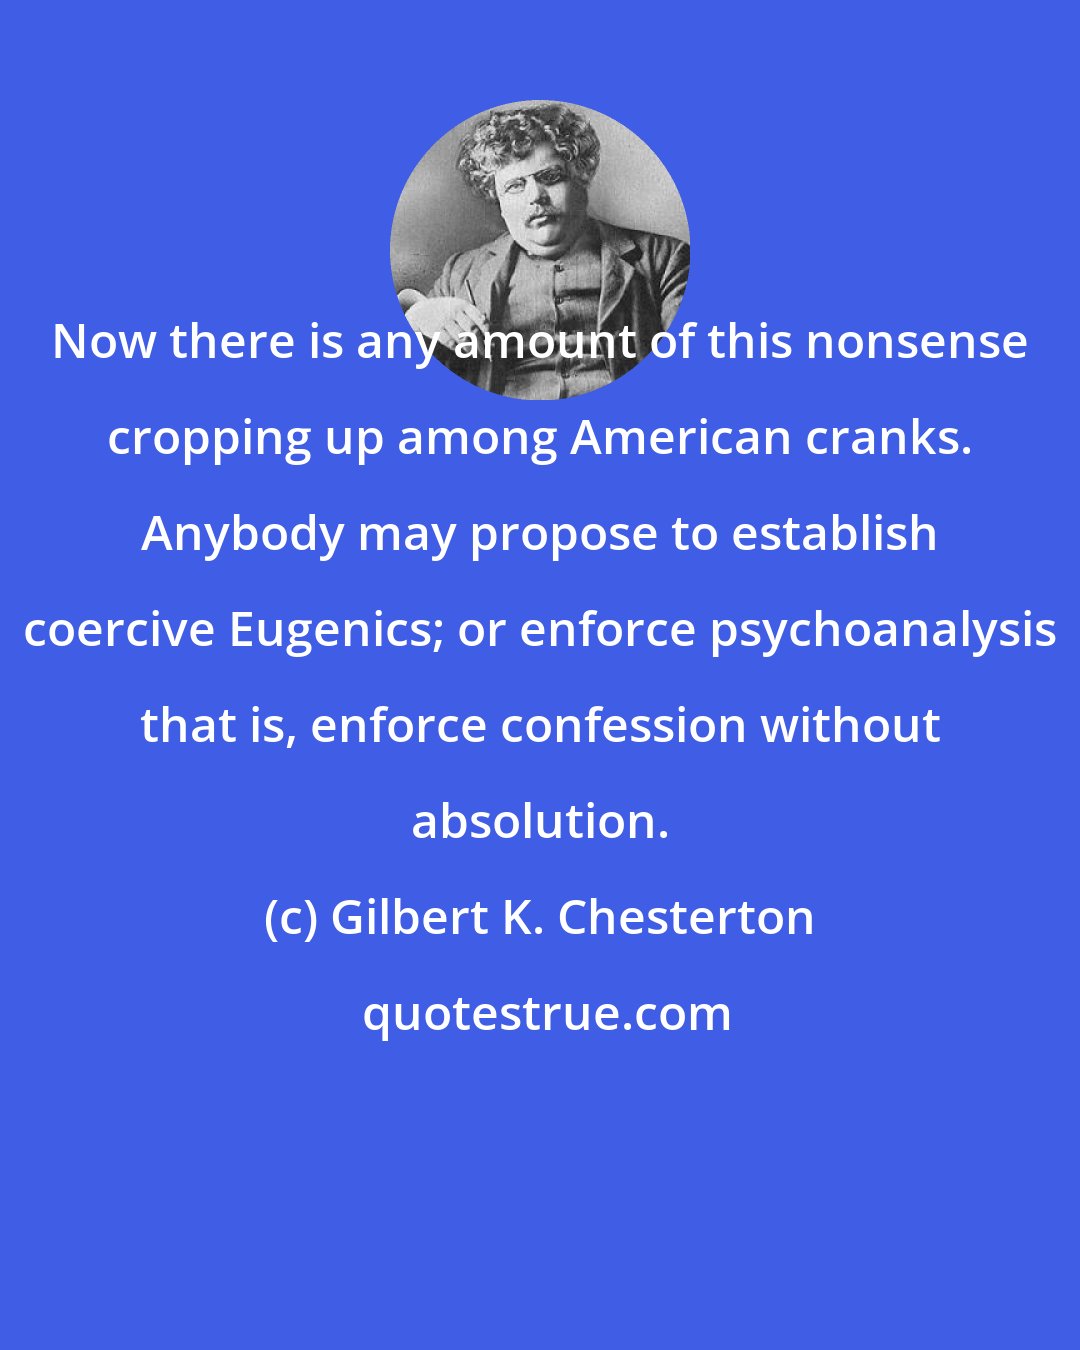 Gilbert K. Chesterton: Now there is any amount of this nonsense cropping up among American cranks. Anybody may propose to establish coercive Eugenics; or enforce psychoanalysis that is, enforce confession without absolution.